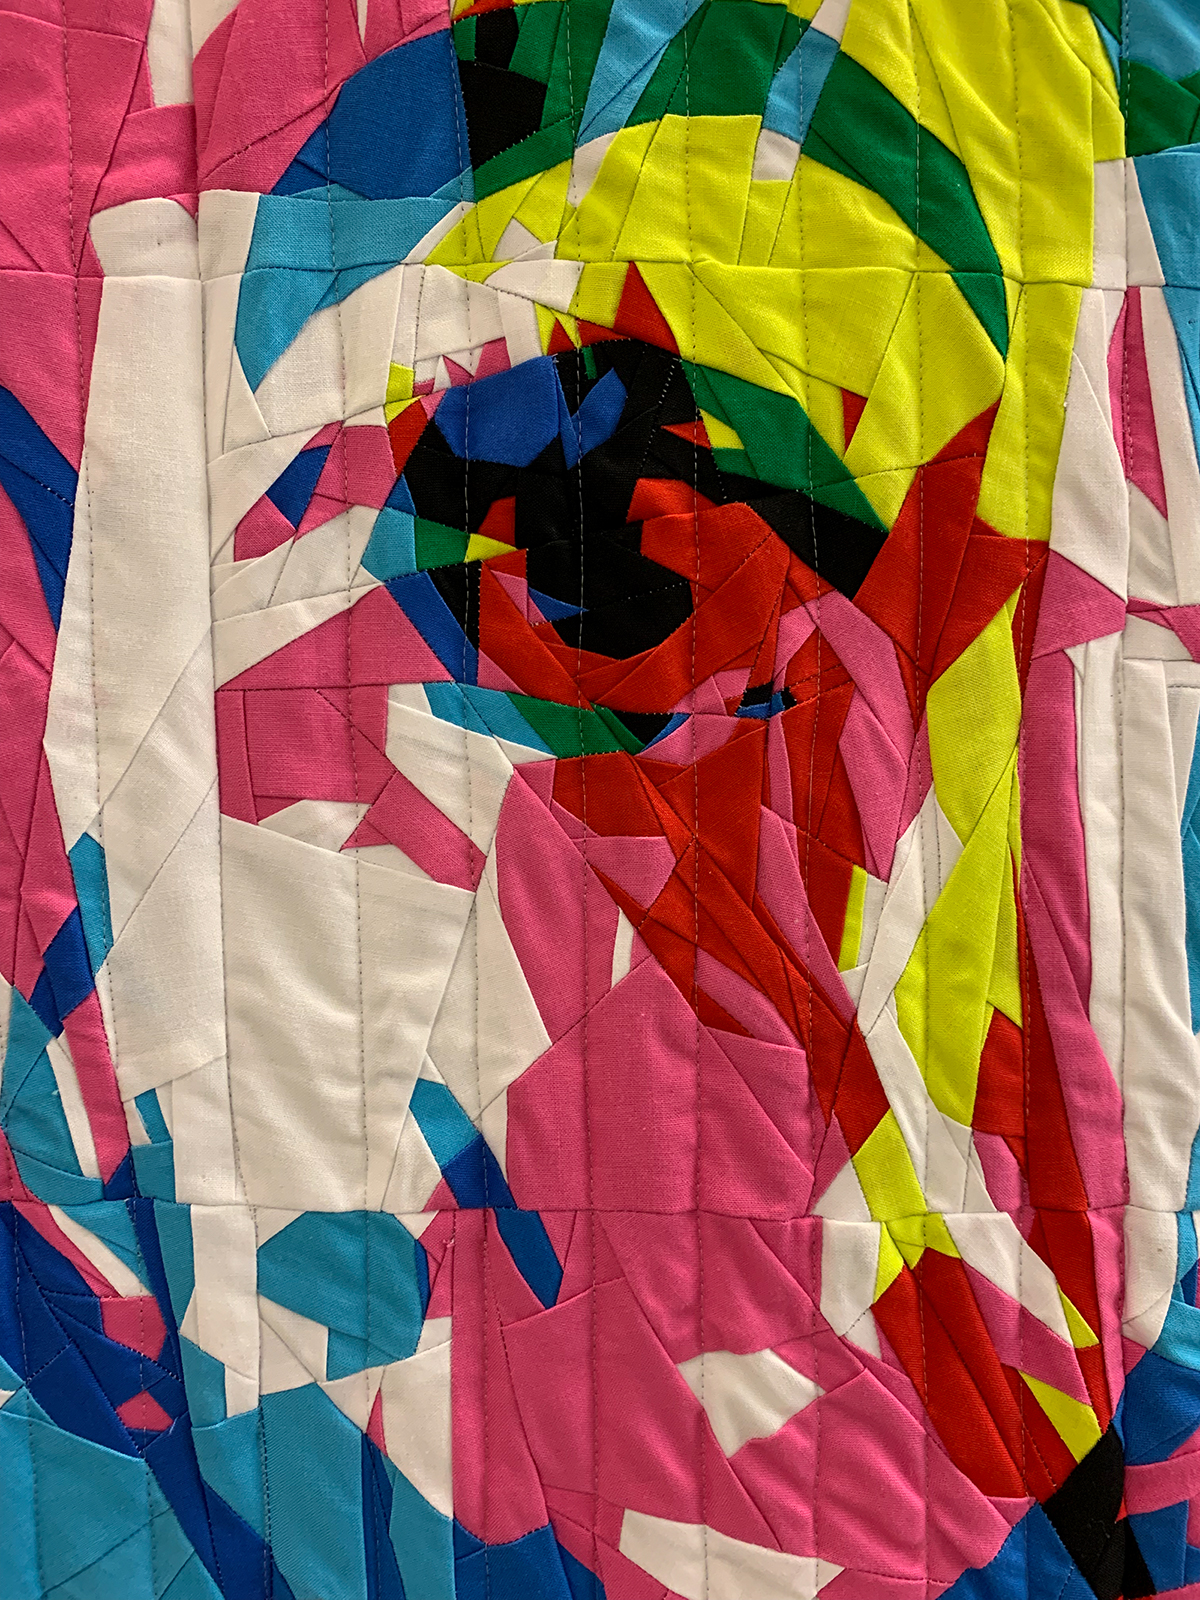 detail of modern quilt with 3 layered faces on a man: cyan, magenta, yellow